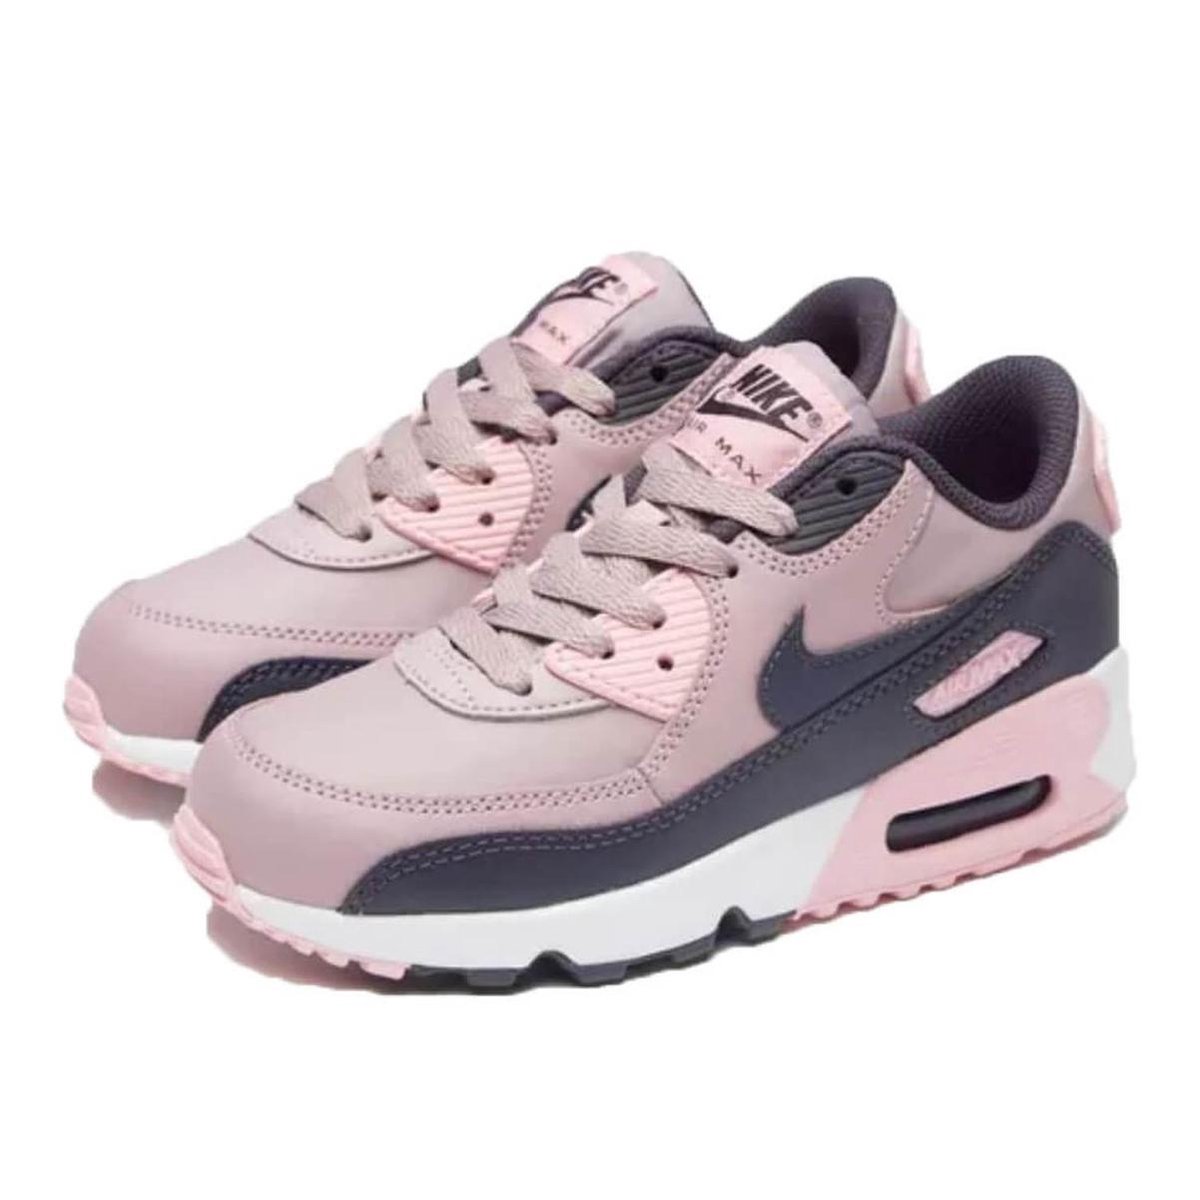 Nike Air Max 90 Leather PS 833377-602 Roze Paars-31 | bol.com